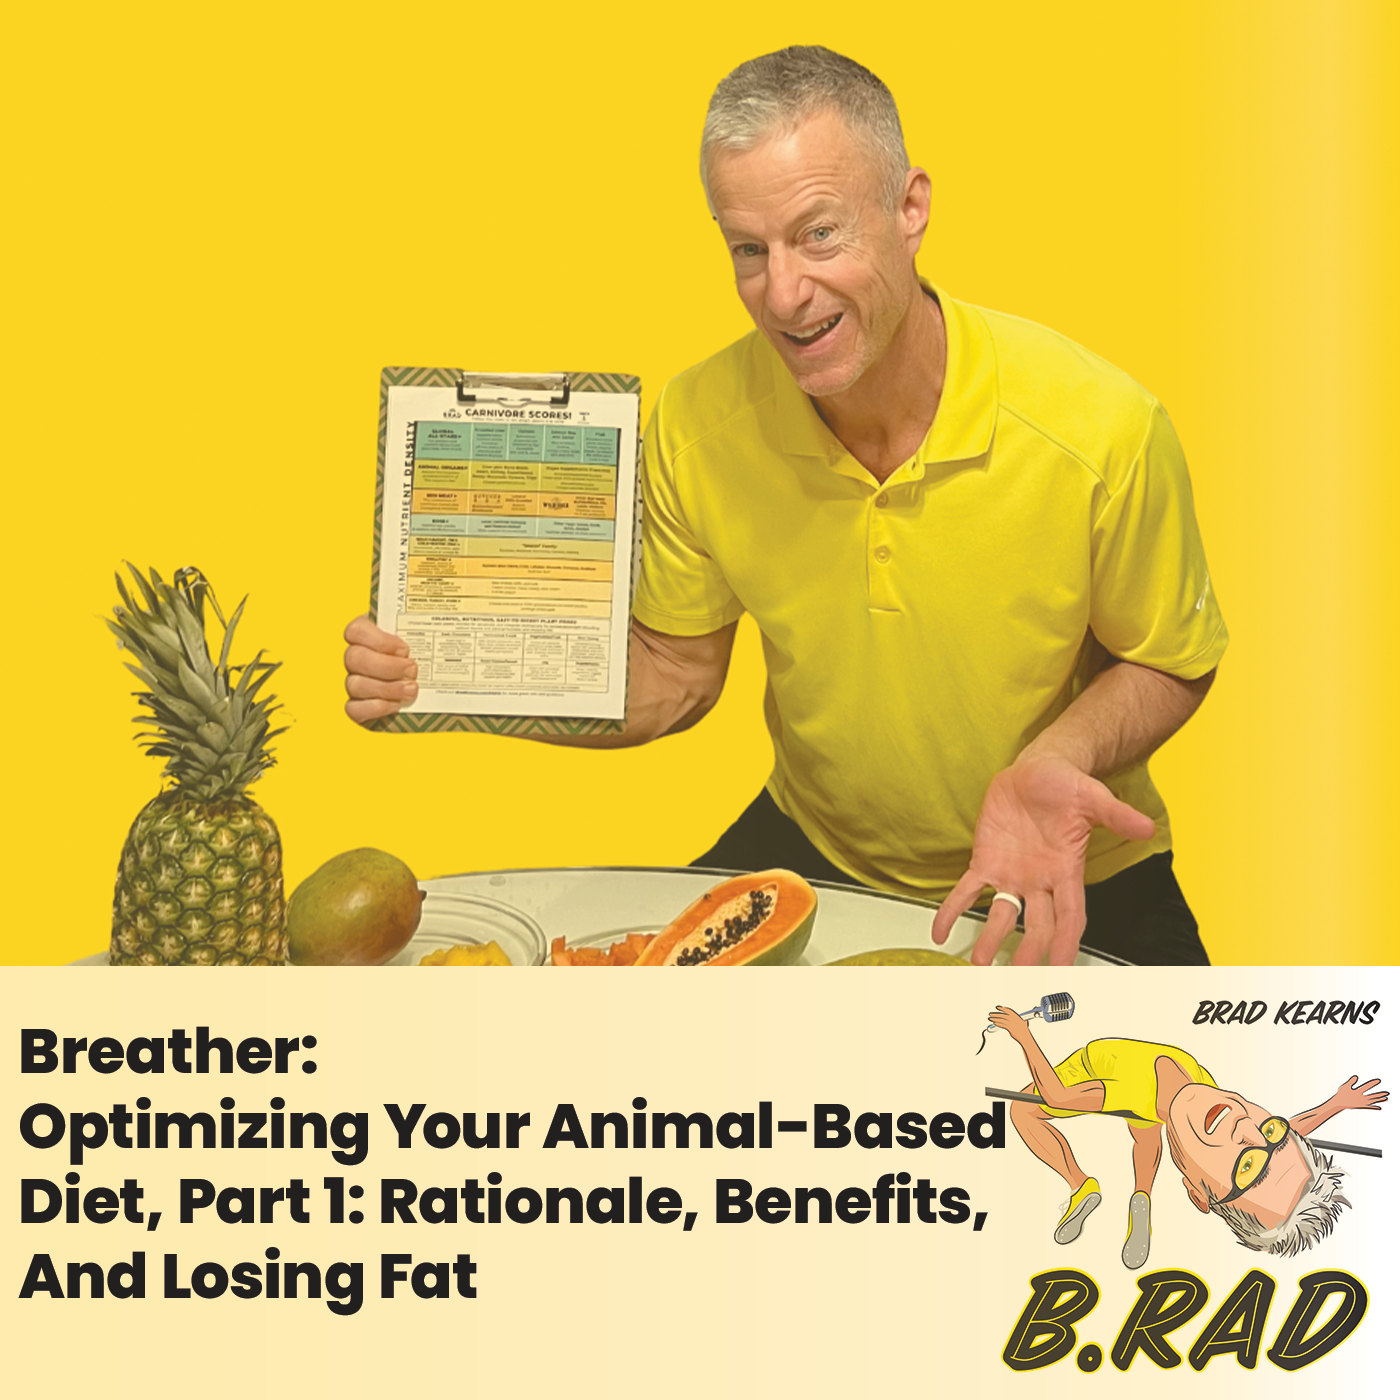 Optimizing Your Animal-Based Diet, Part 1: Rationale, Benefits, And Losing Fat